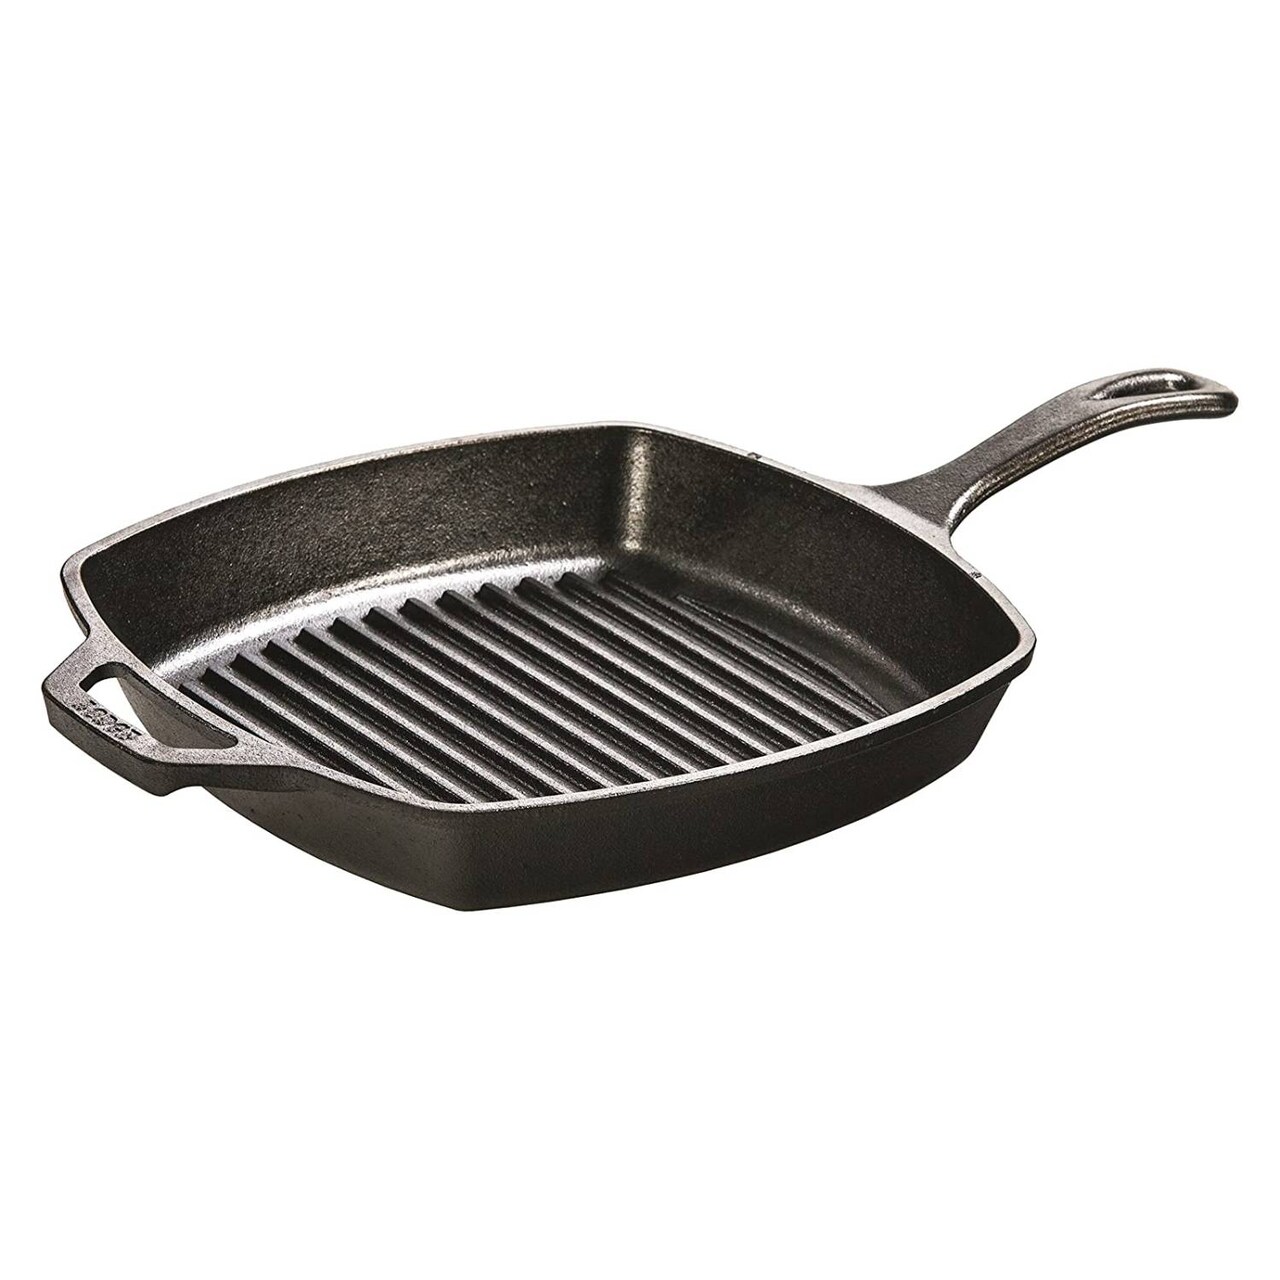 Lodge Cast Iron Square Grill Pan for Indoor/Outdoor Use, 10.5 inches